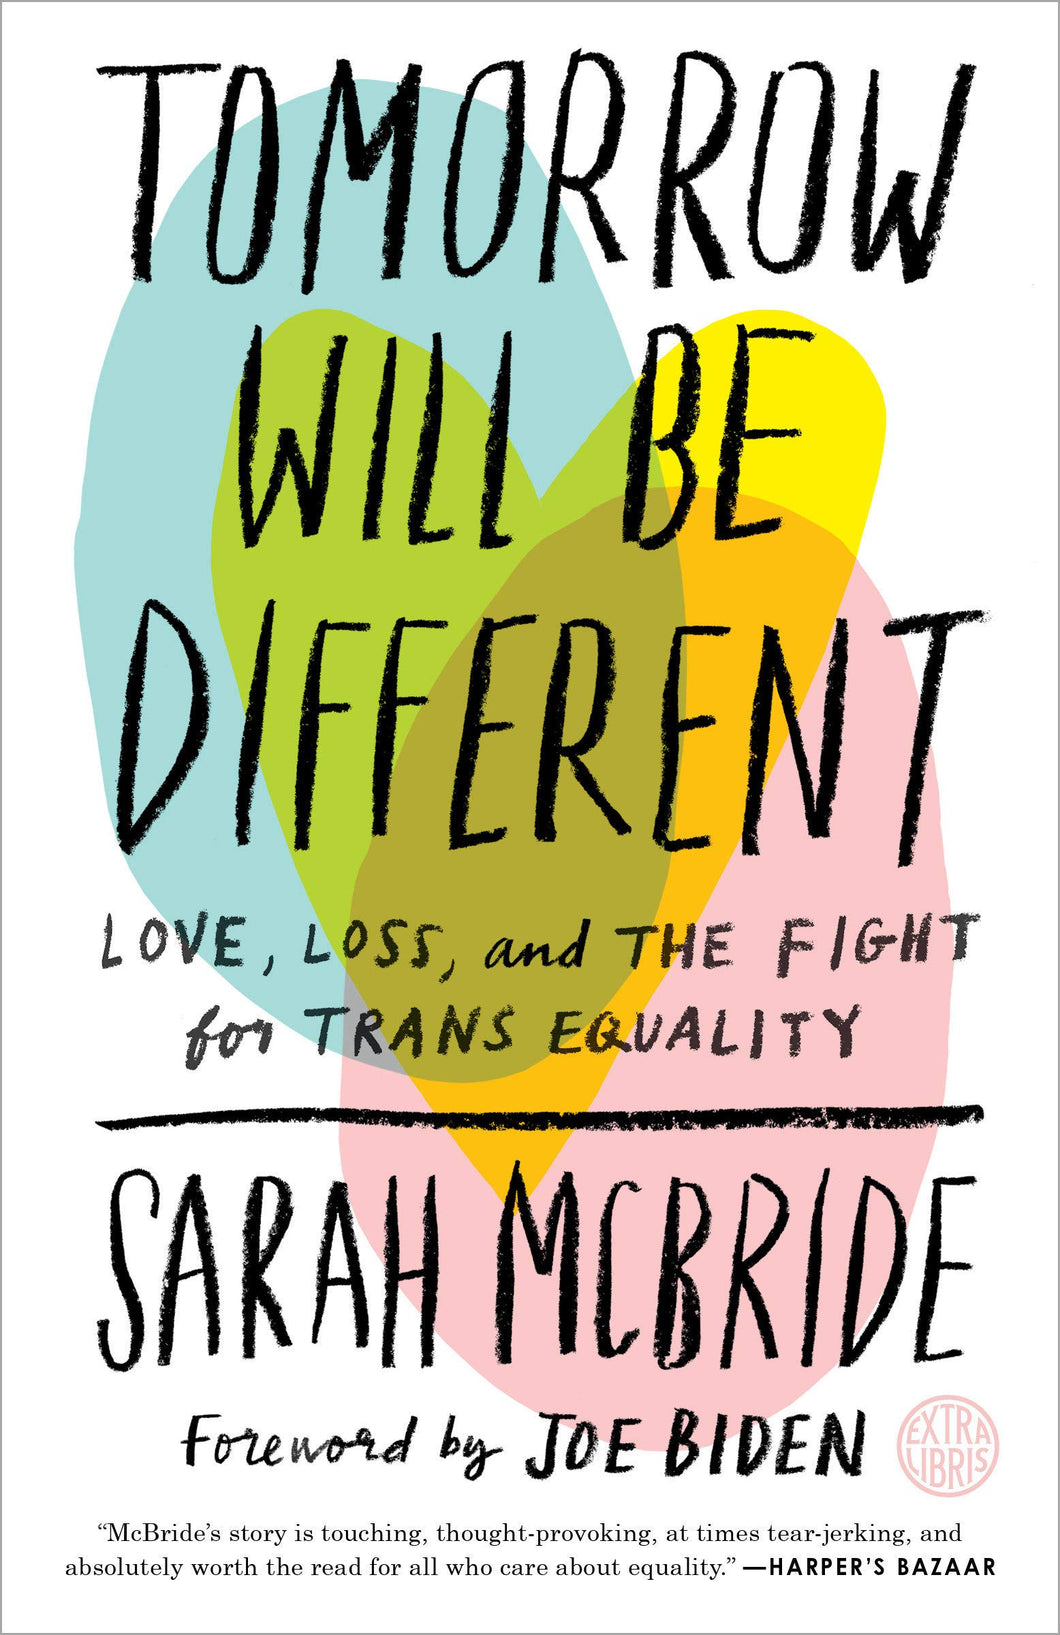 Tomorrow Will Be Different: Love, Loss, And The Fight For Trans Equality [Sarah McBride]